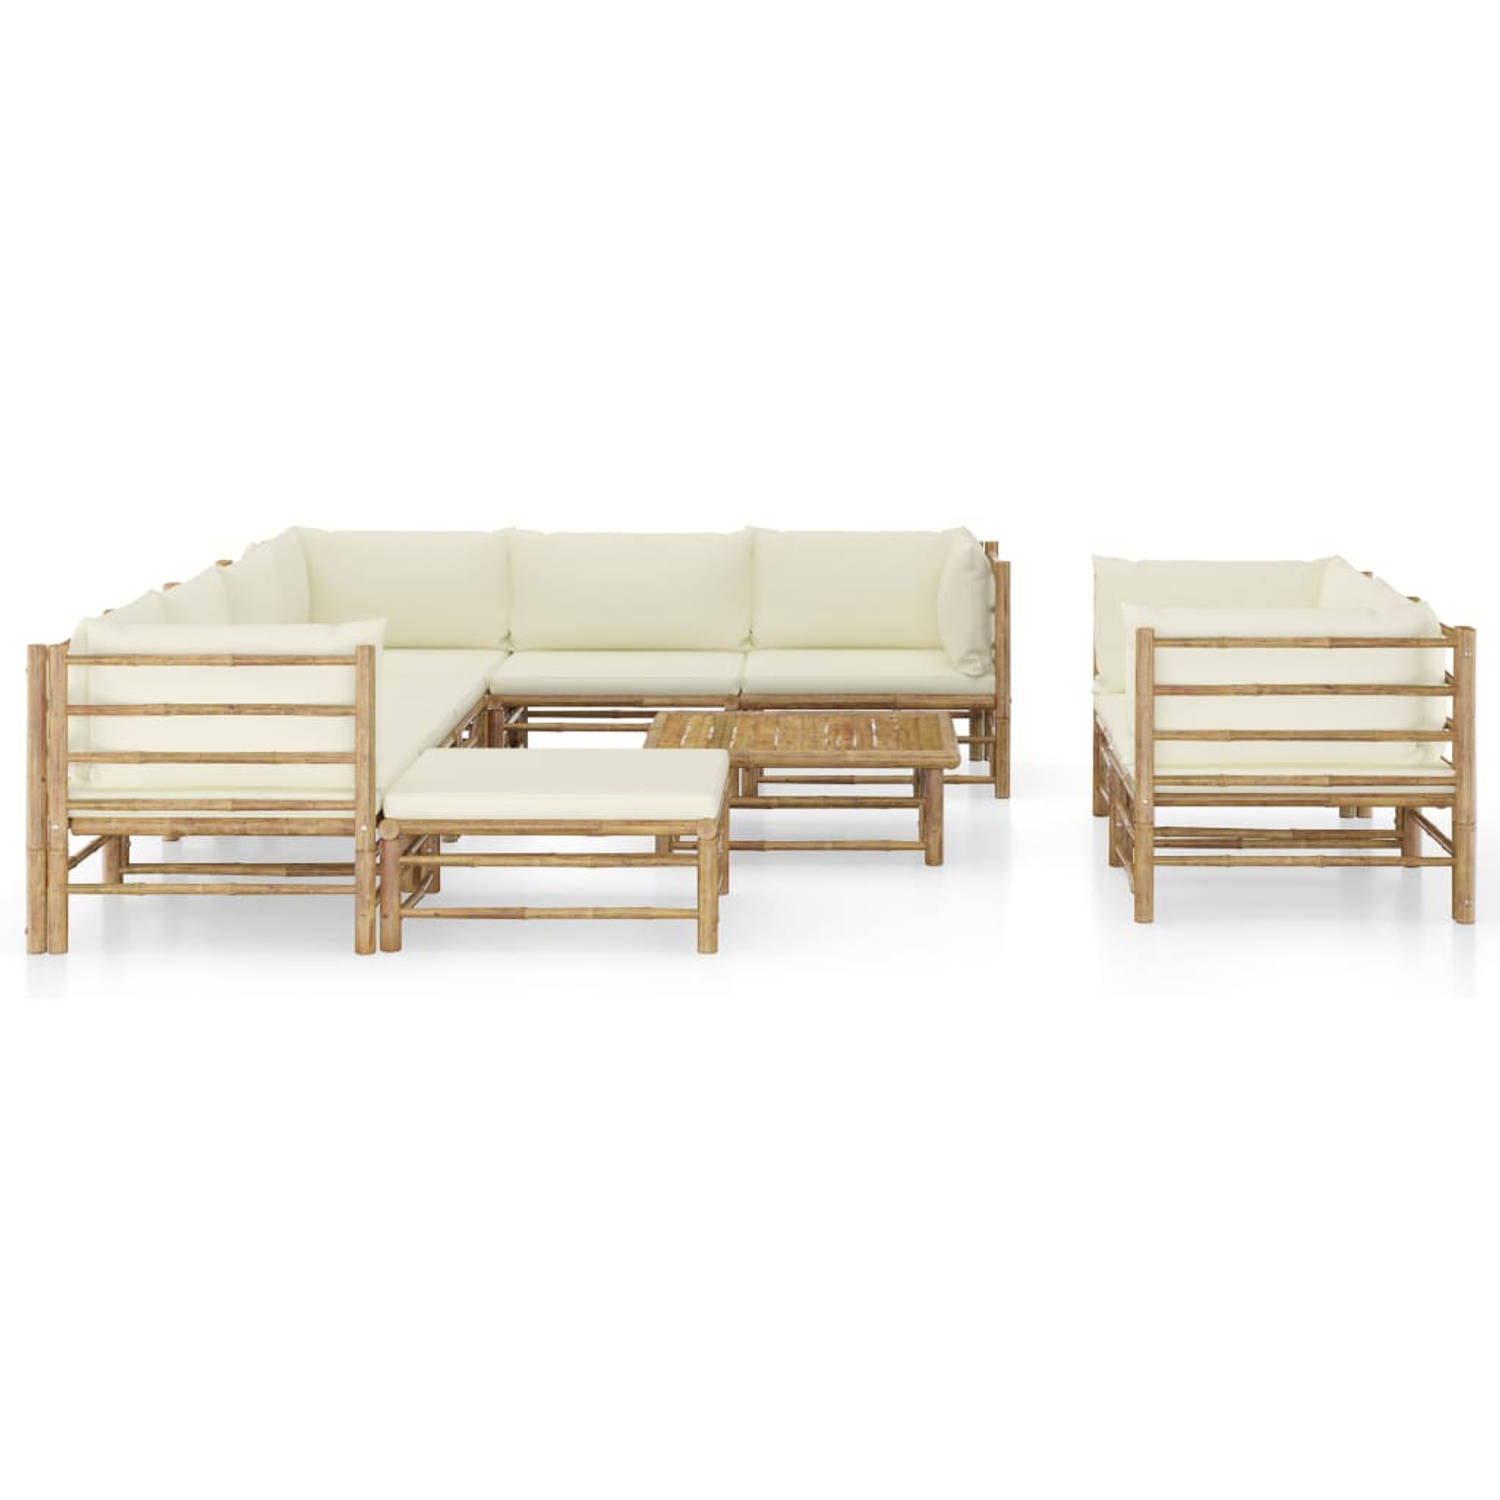 The Living Store 10-delige Loungeset met crèmewitte kussens bamboe - Tuinset